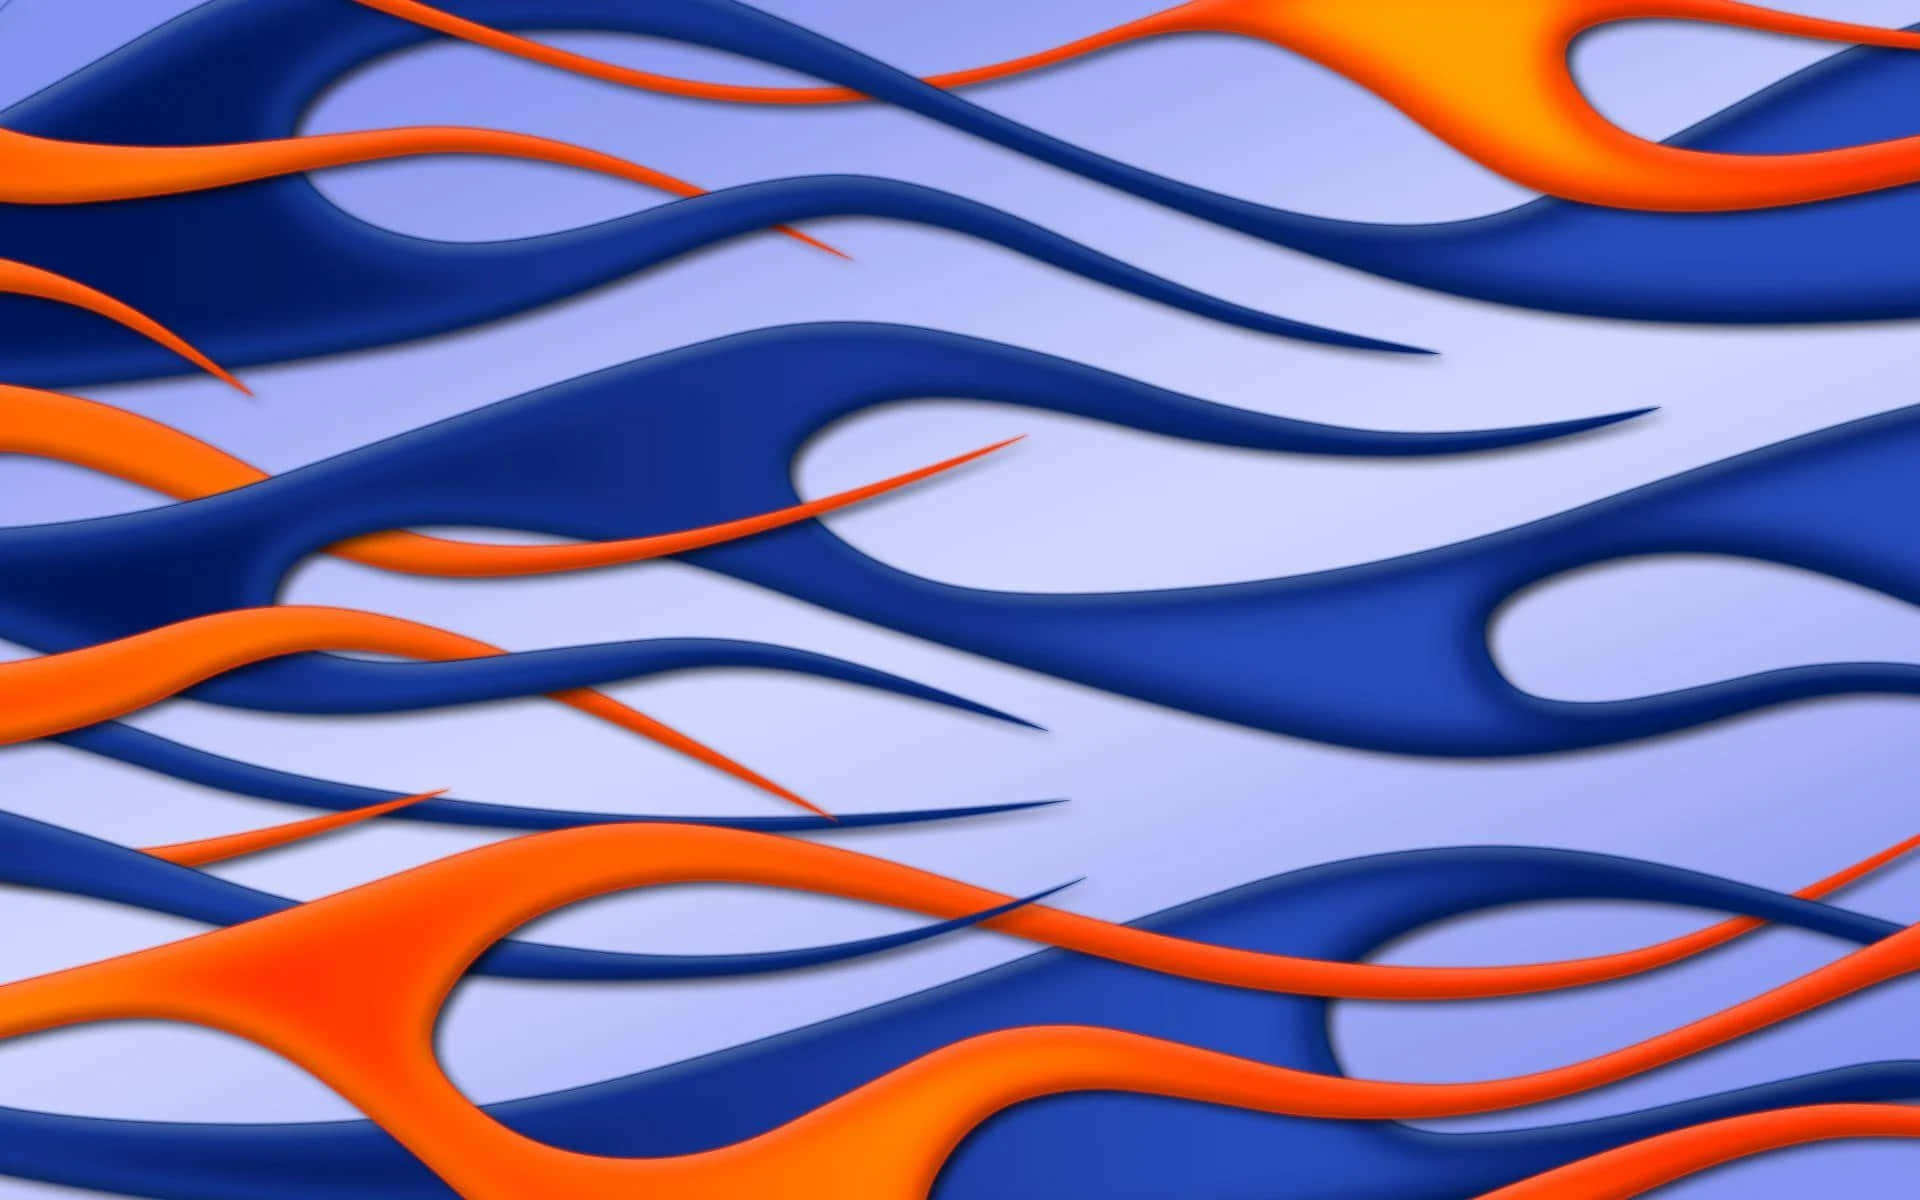 Enjoy the beauty of the color combination of orange and blue.